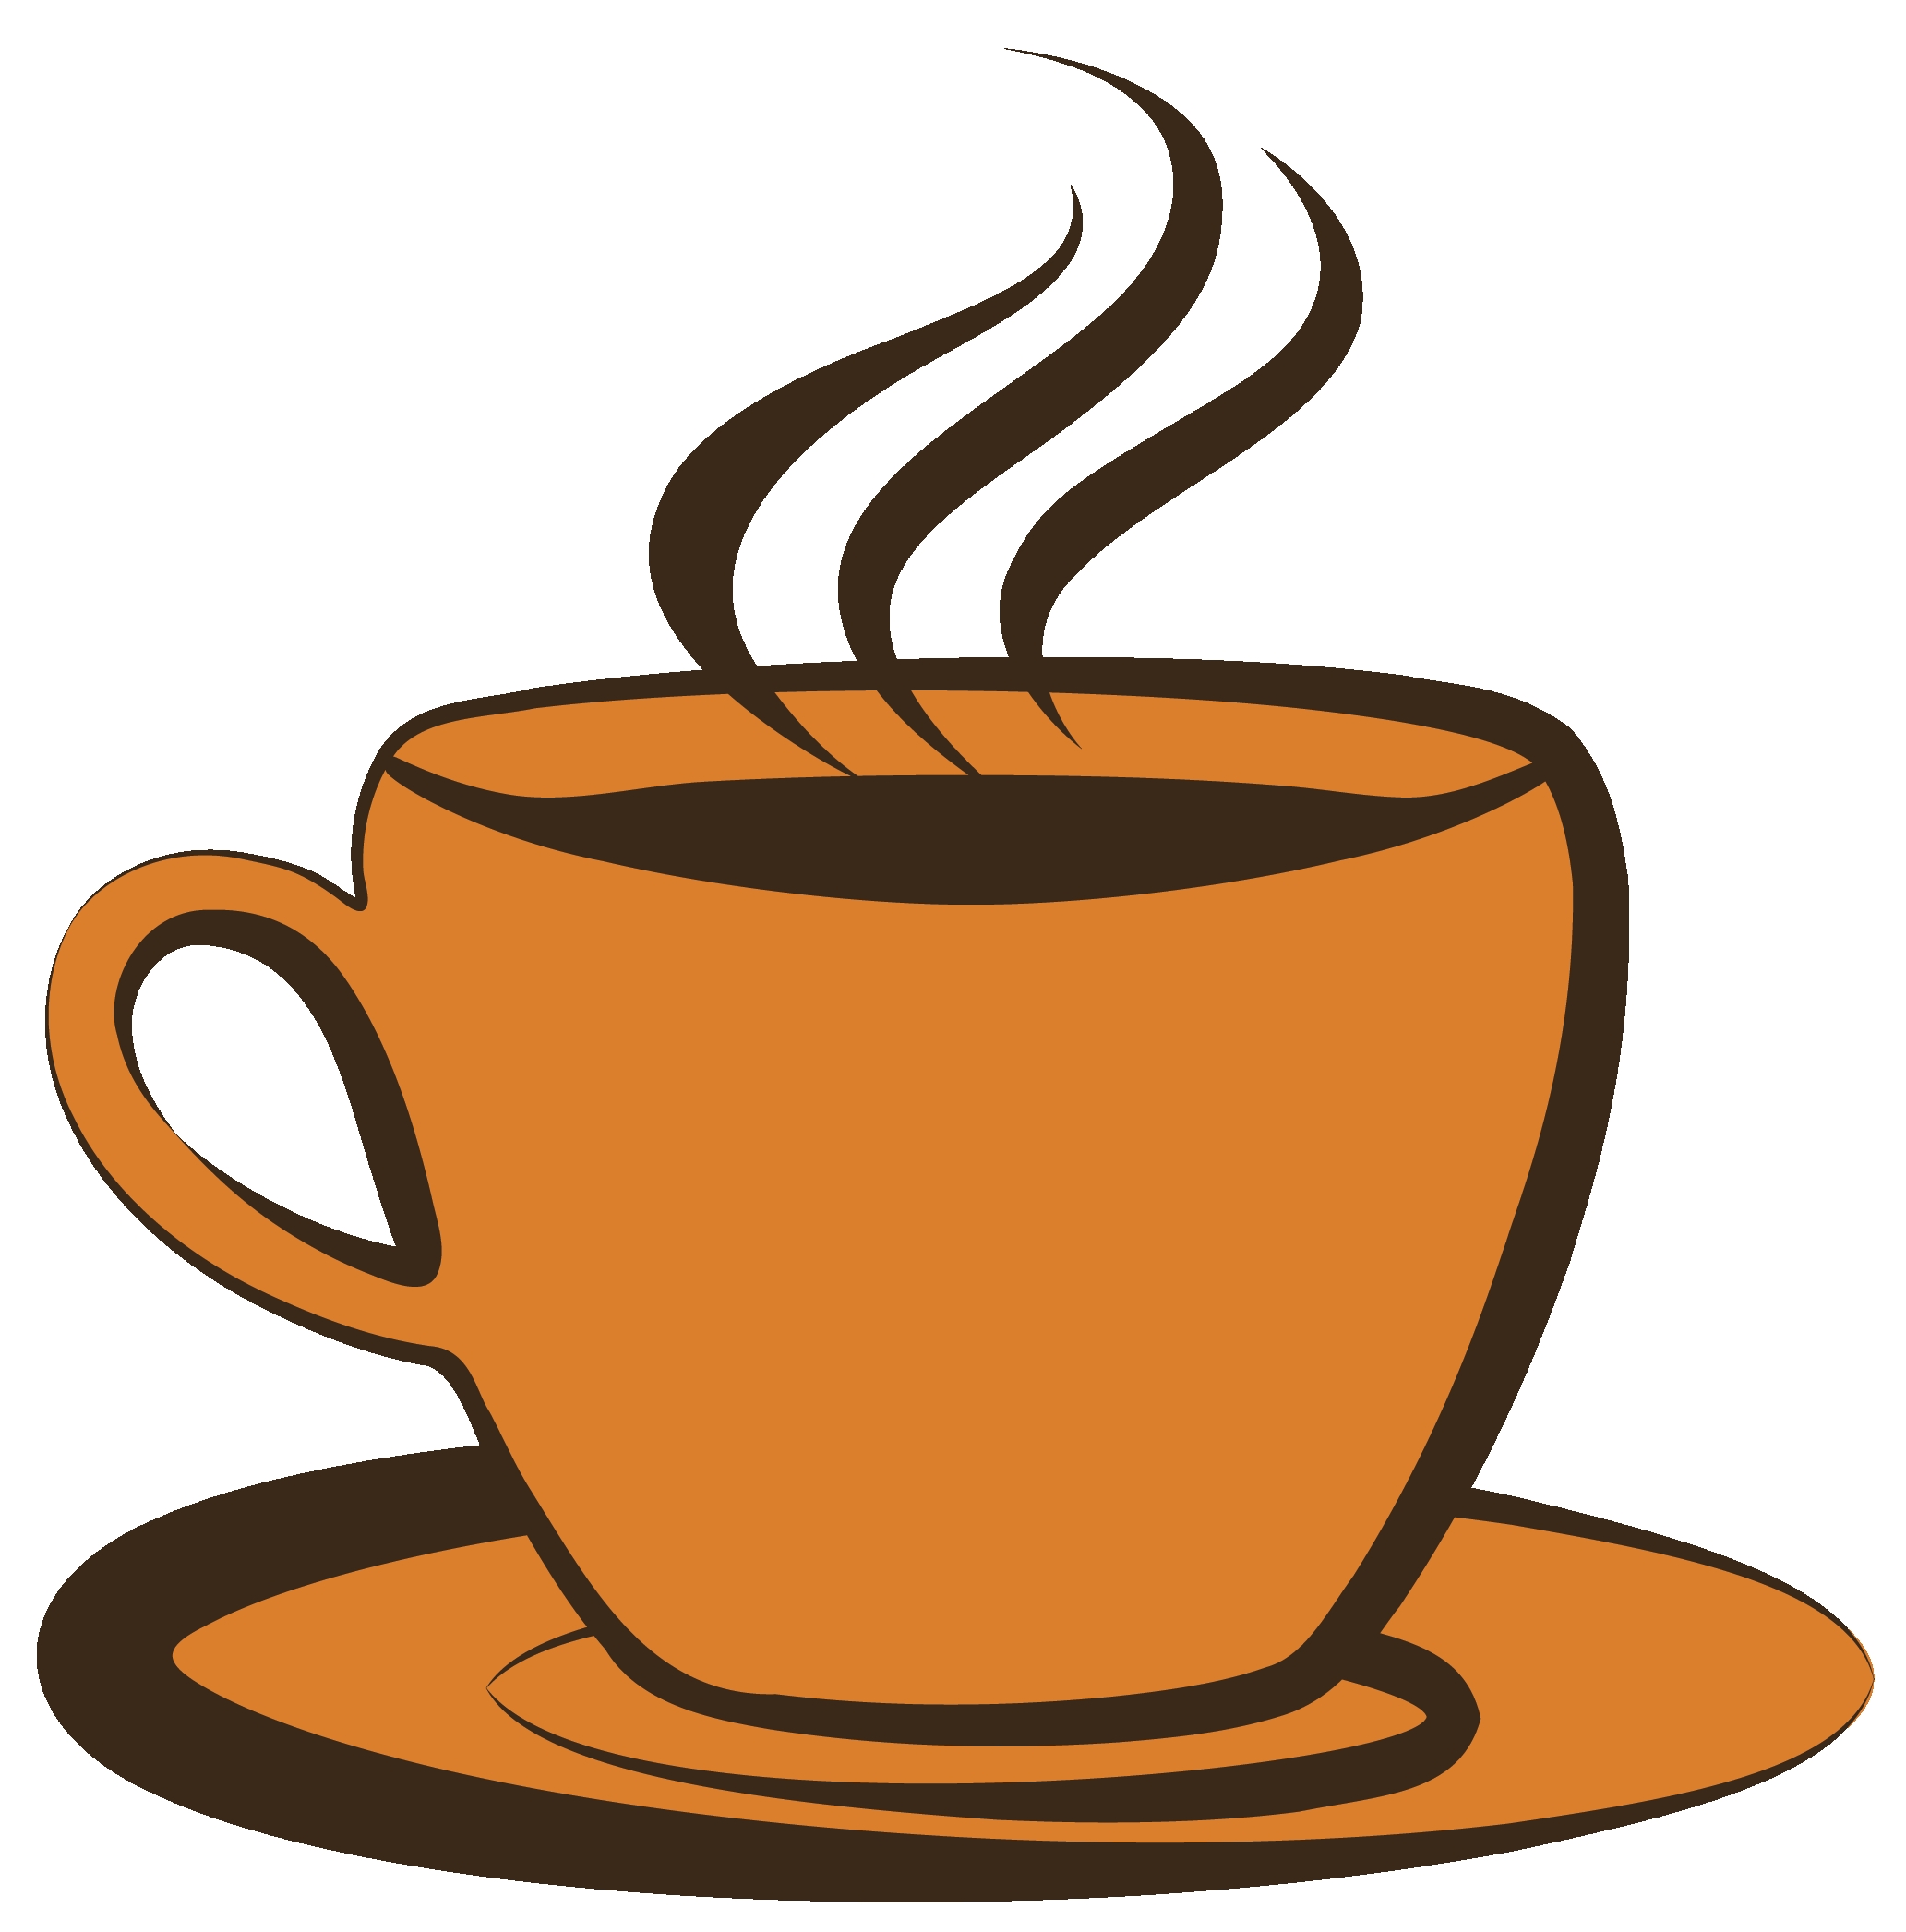 Coffee Mug Cliparts | Free download on ClipArtMag